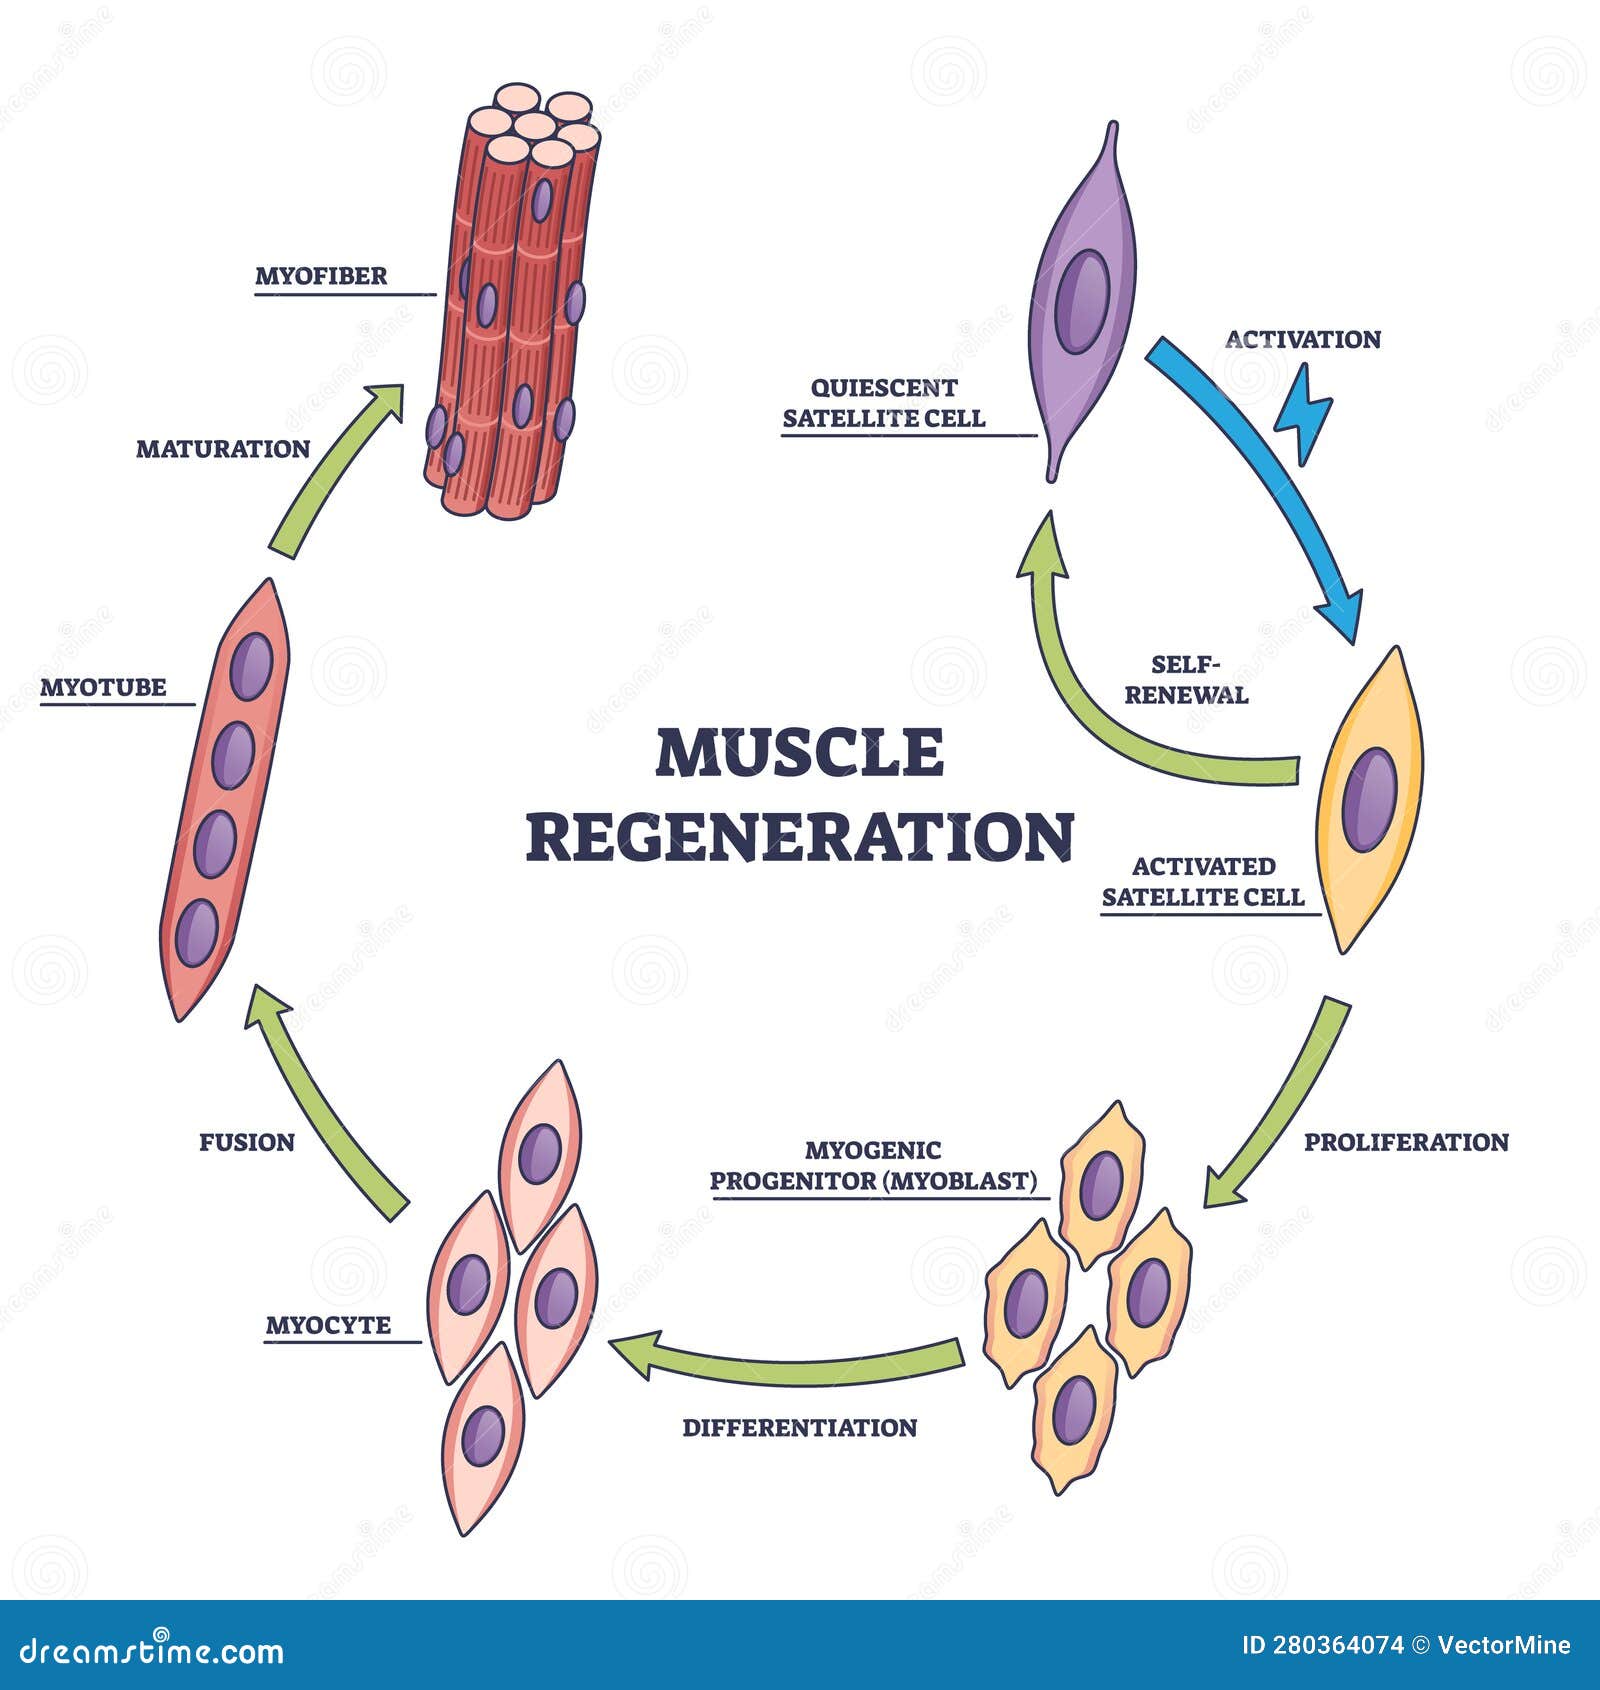 muscle regeneration with microbiological division stages outline diagram